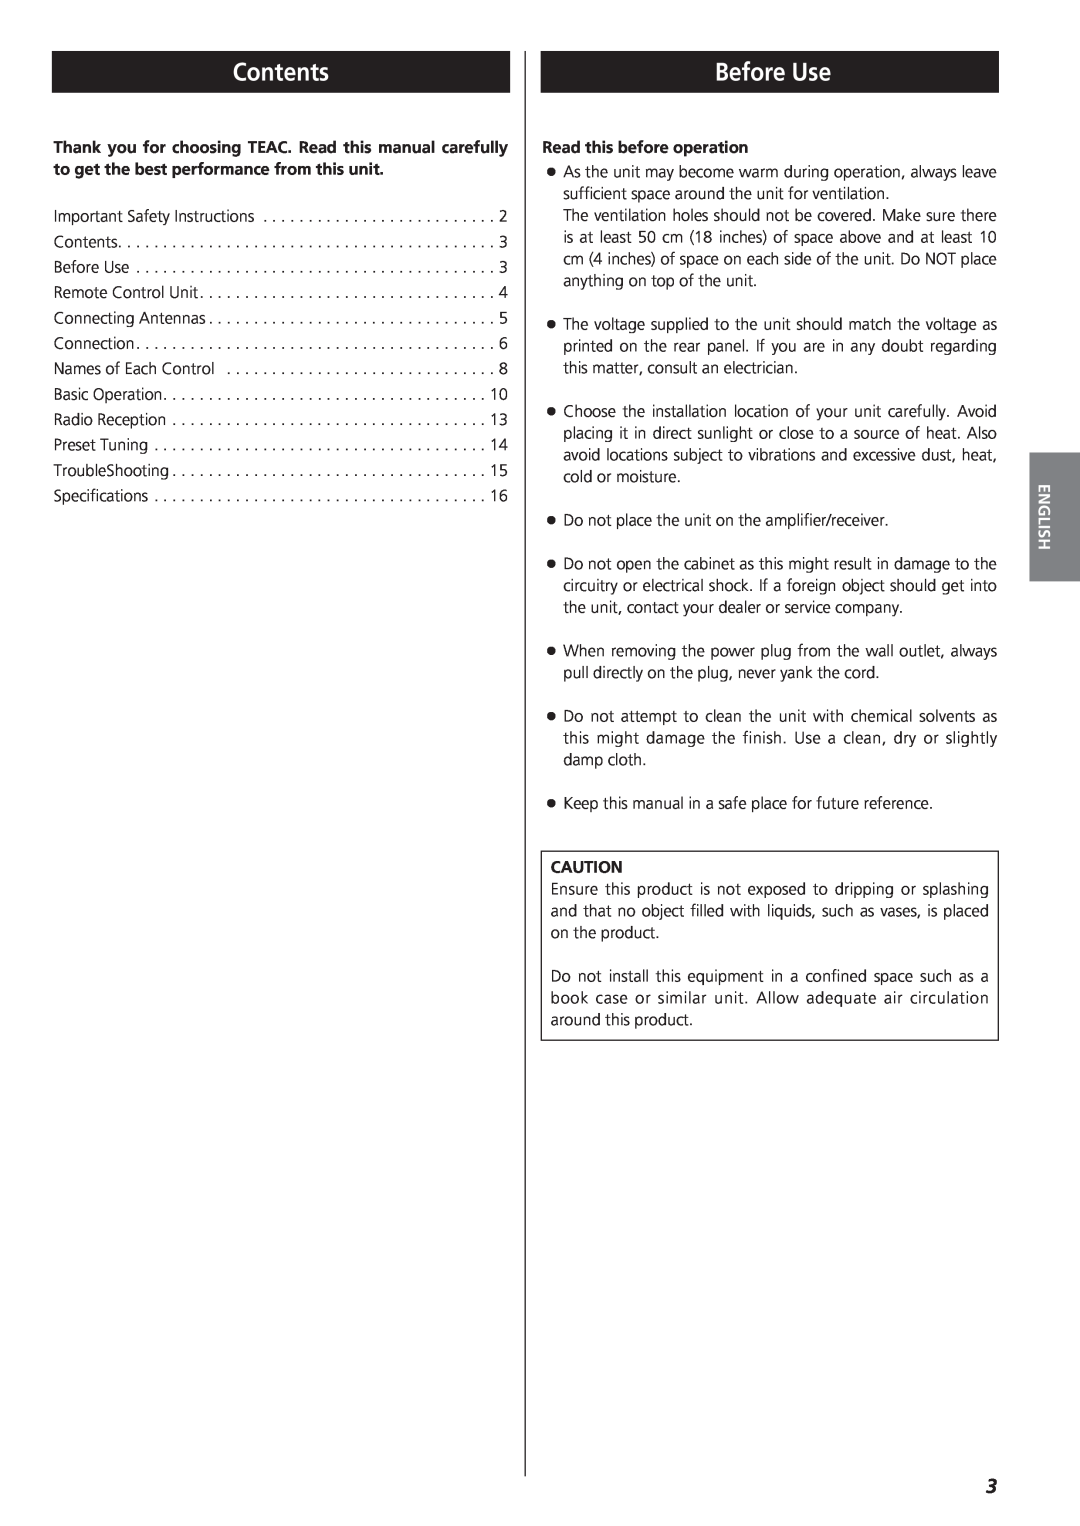 Teac AG-790 owner manual Contents, Before Use, Read this before operation, English 